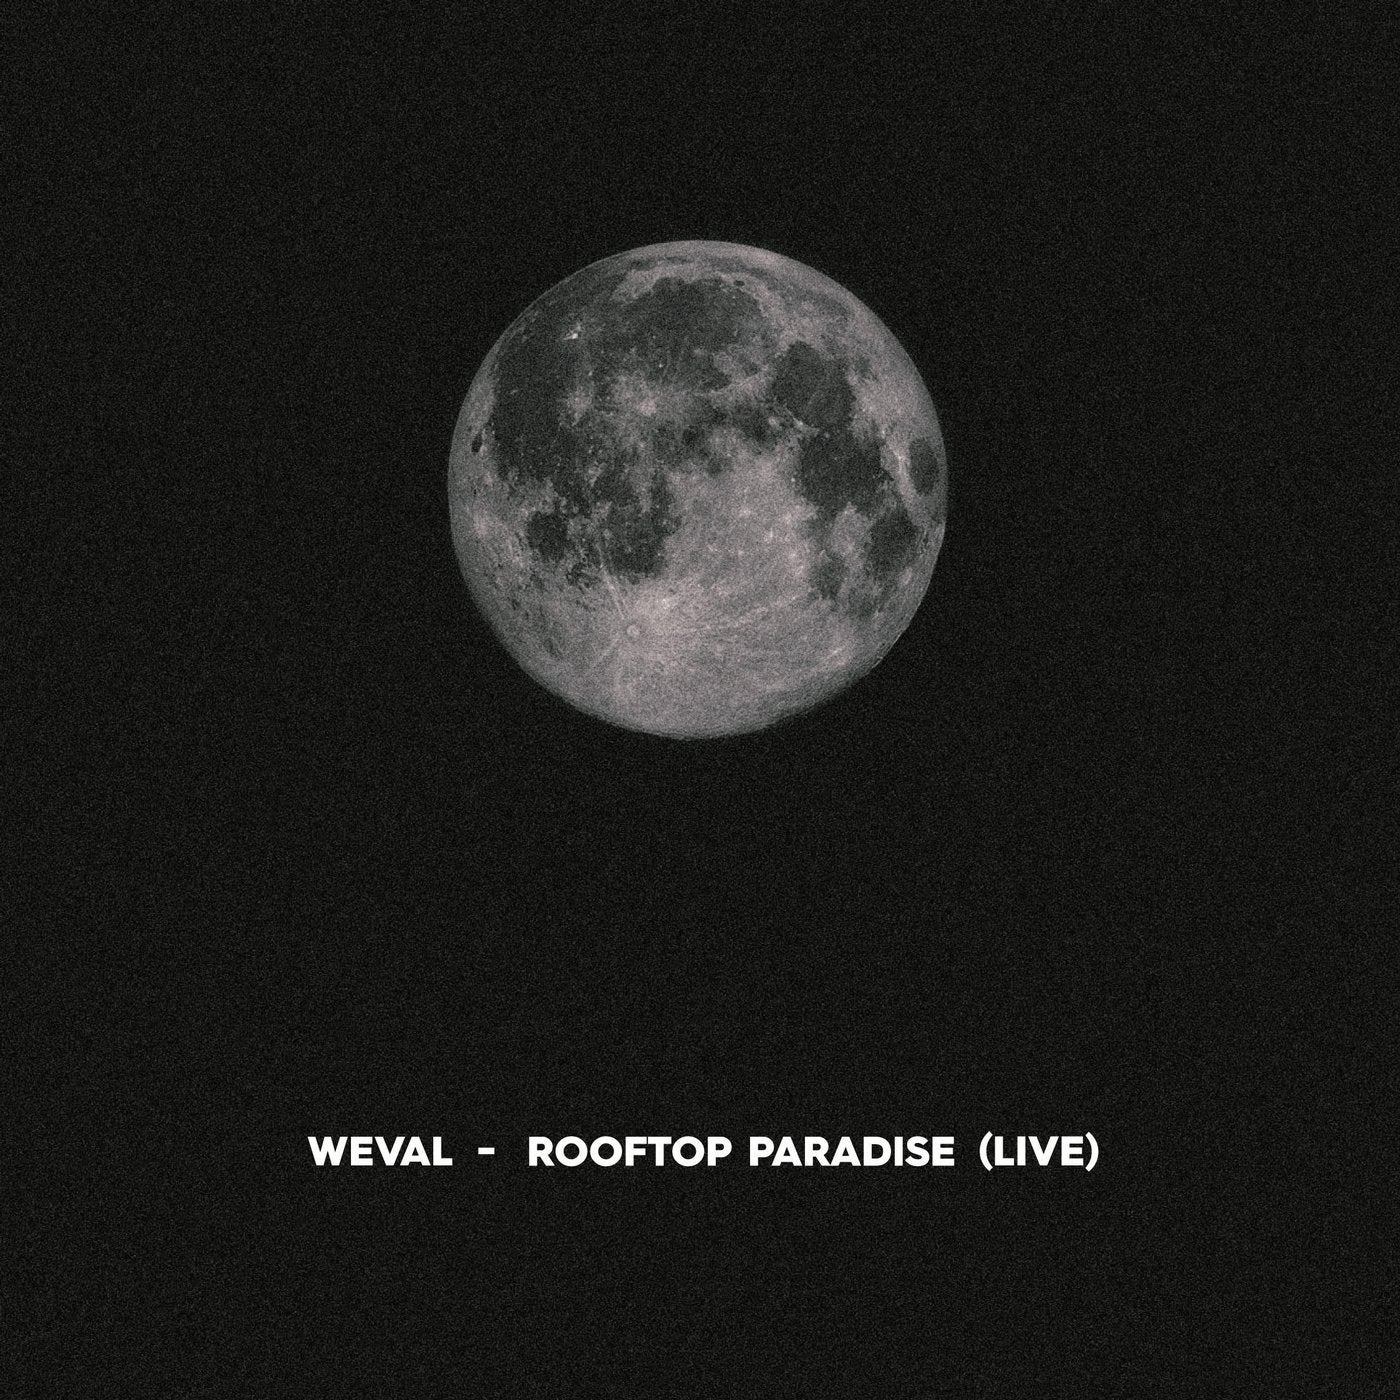 Rooftop Paradise - Live